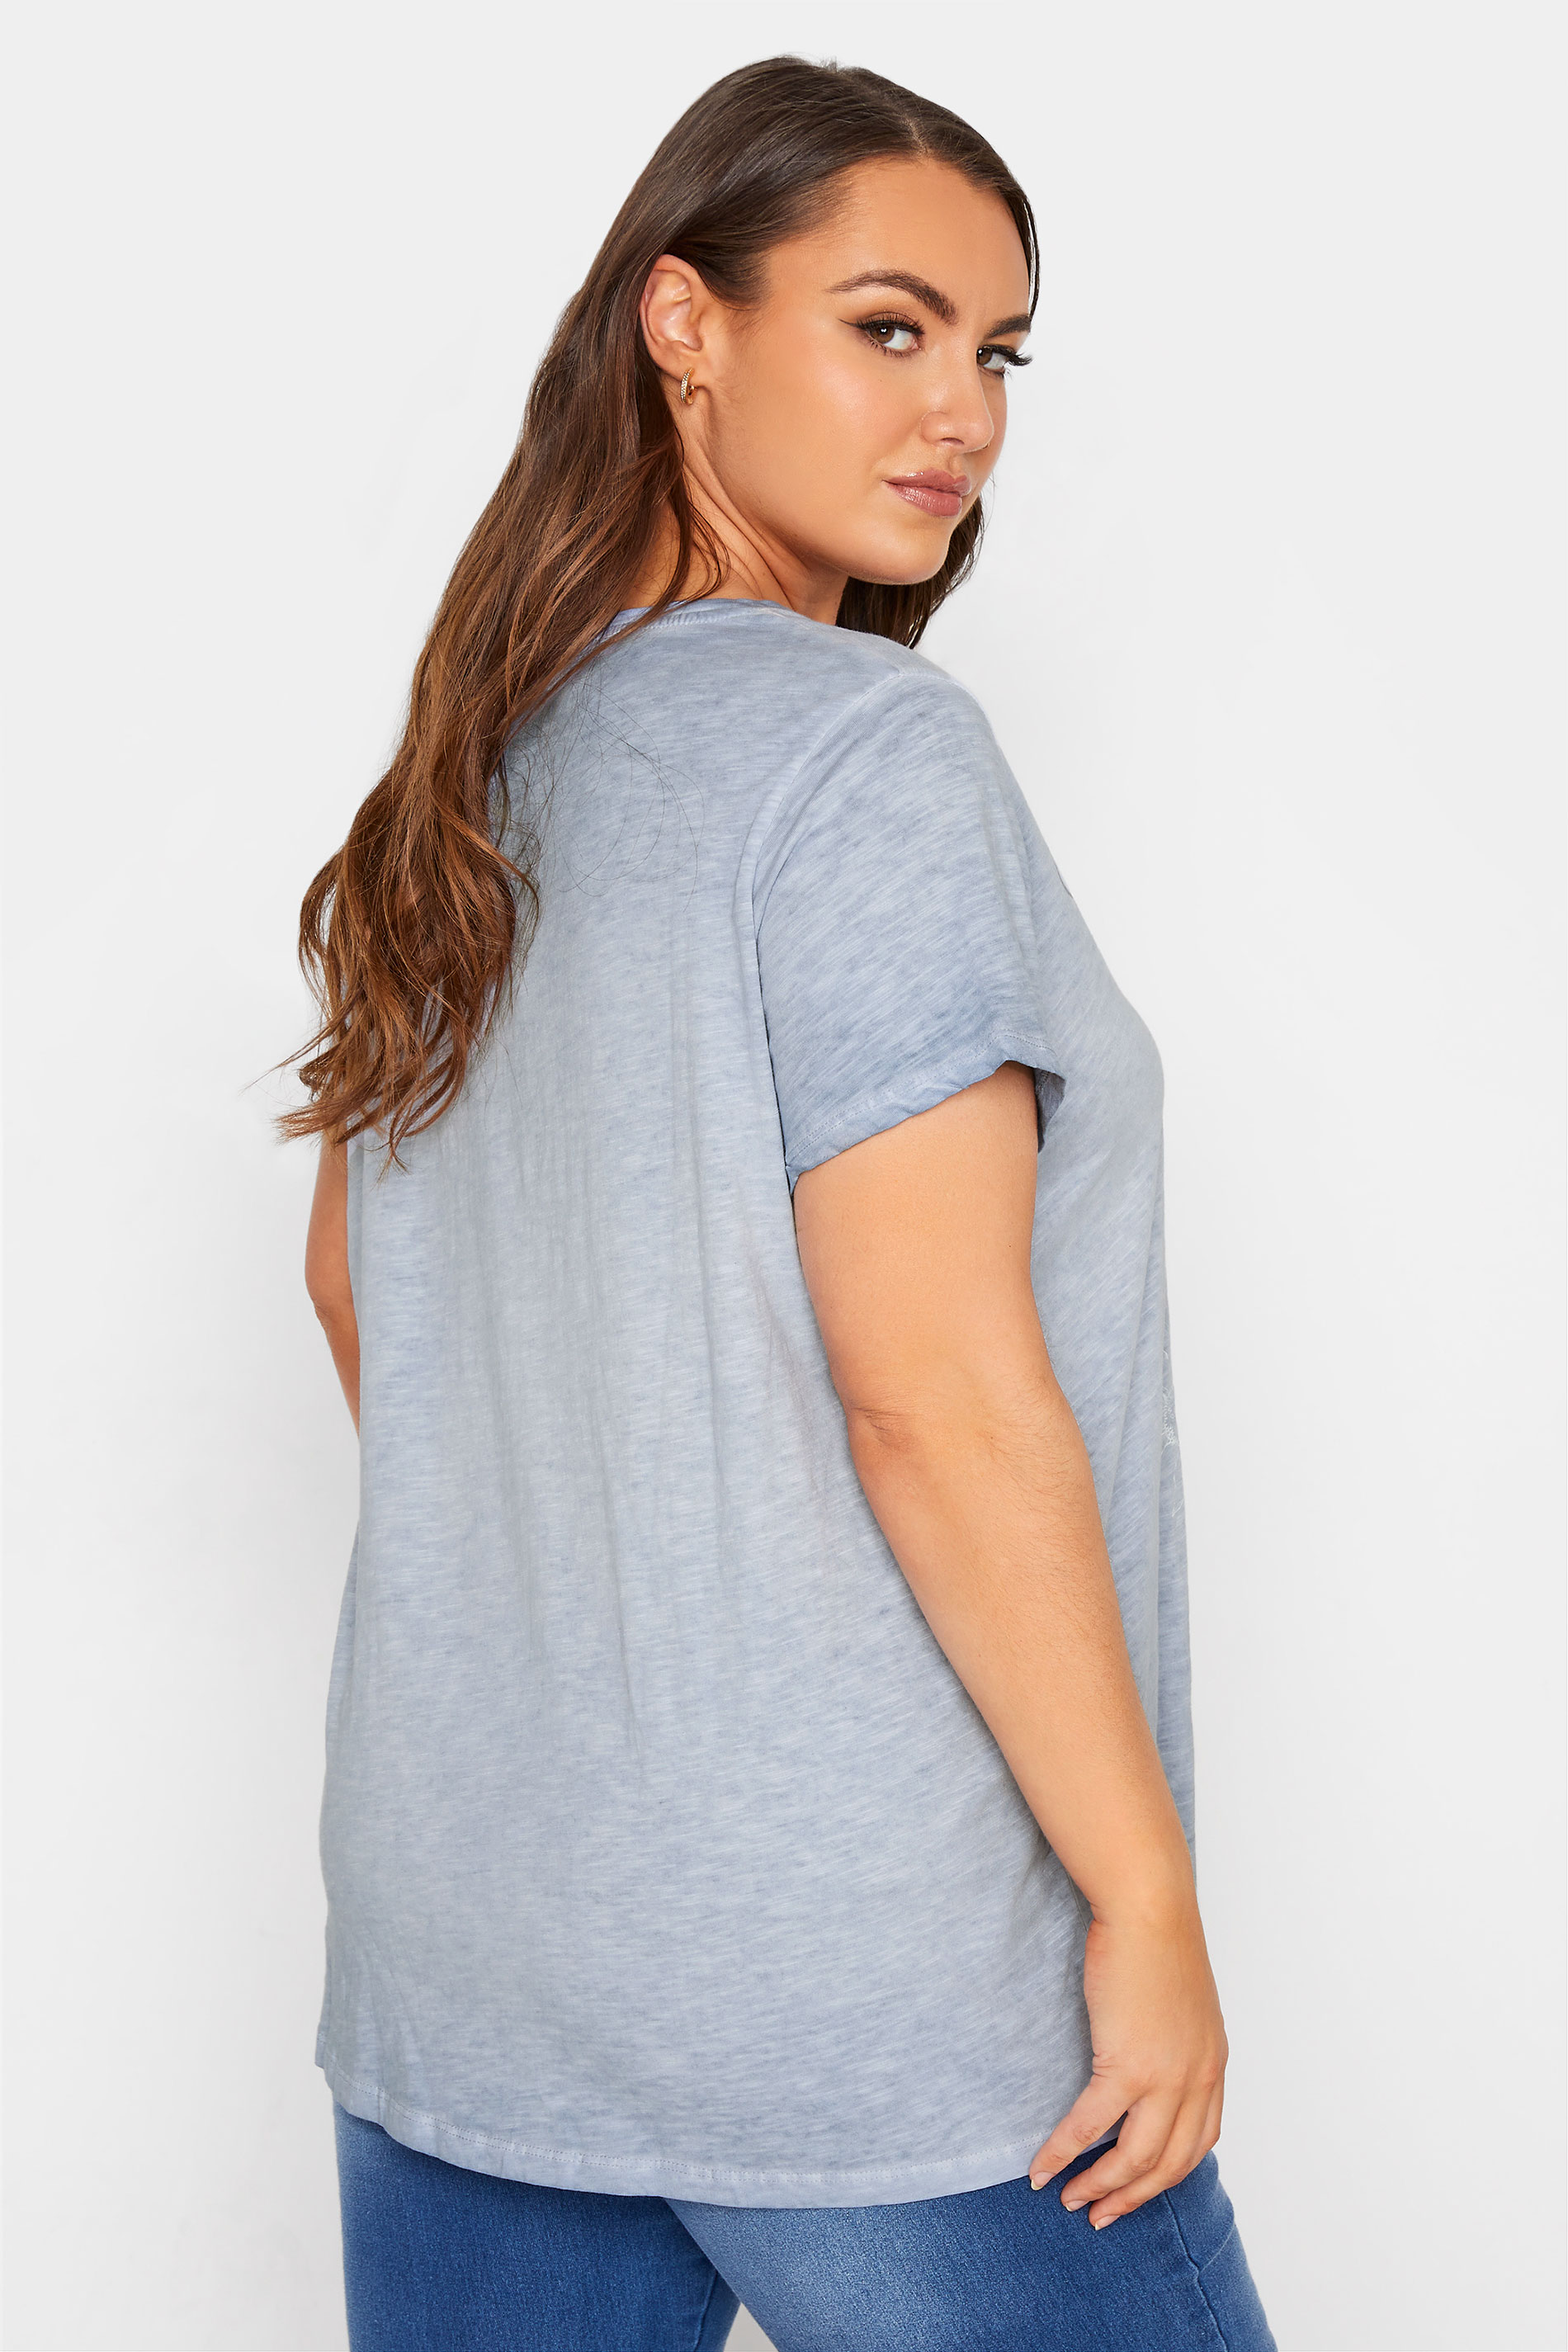 Grande taille  Tops Grande taille  T-Shirts | T-Shirt Bleu 'Spread More Love' - RZ96109